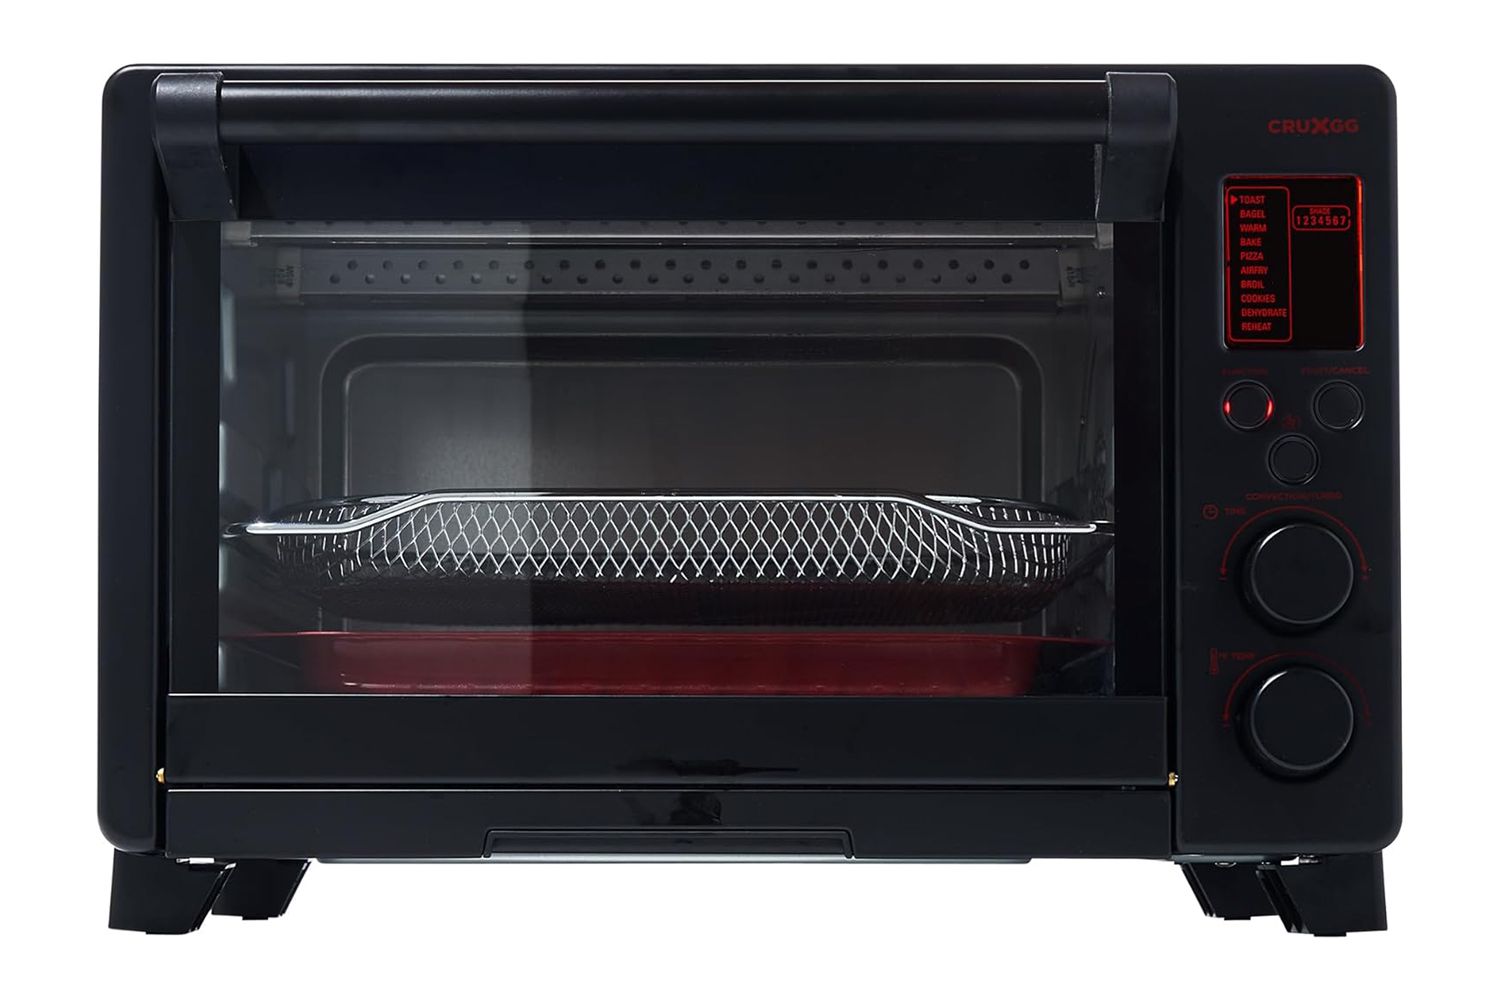 CRUXGG Digital Toaster Oven with Air Frying